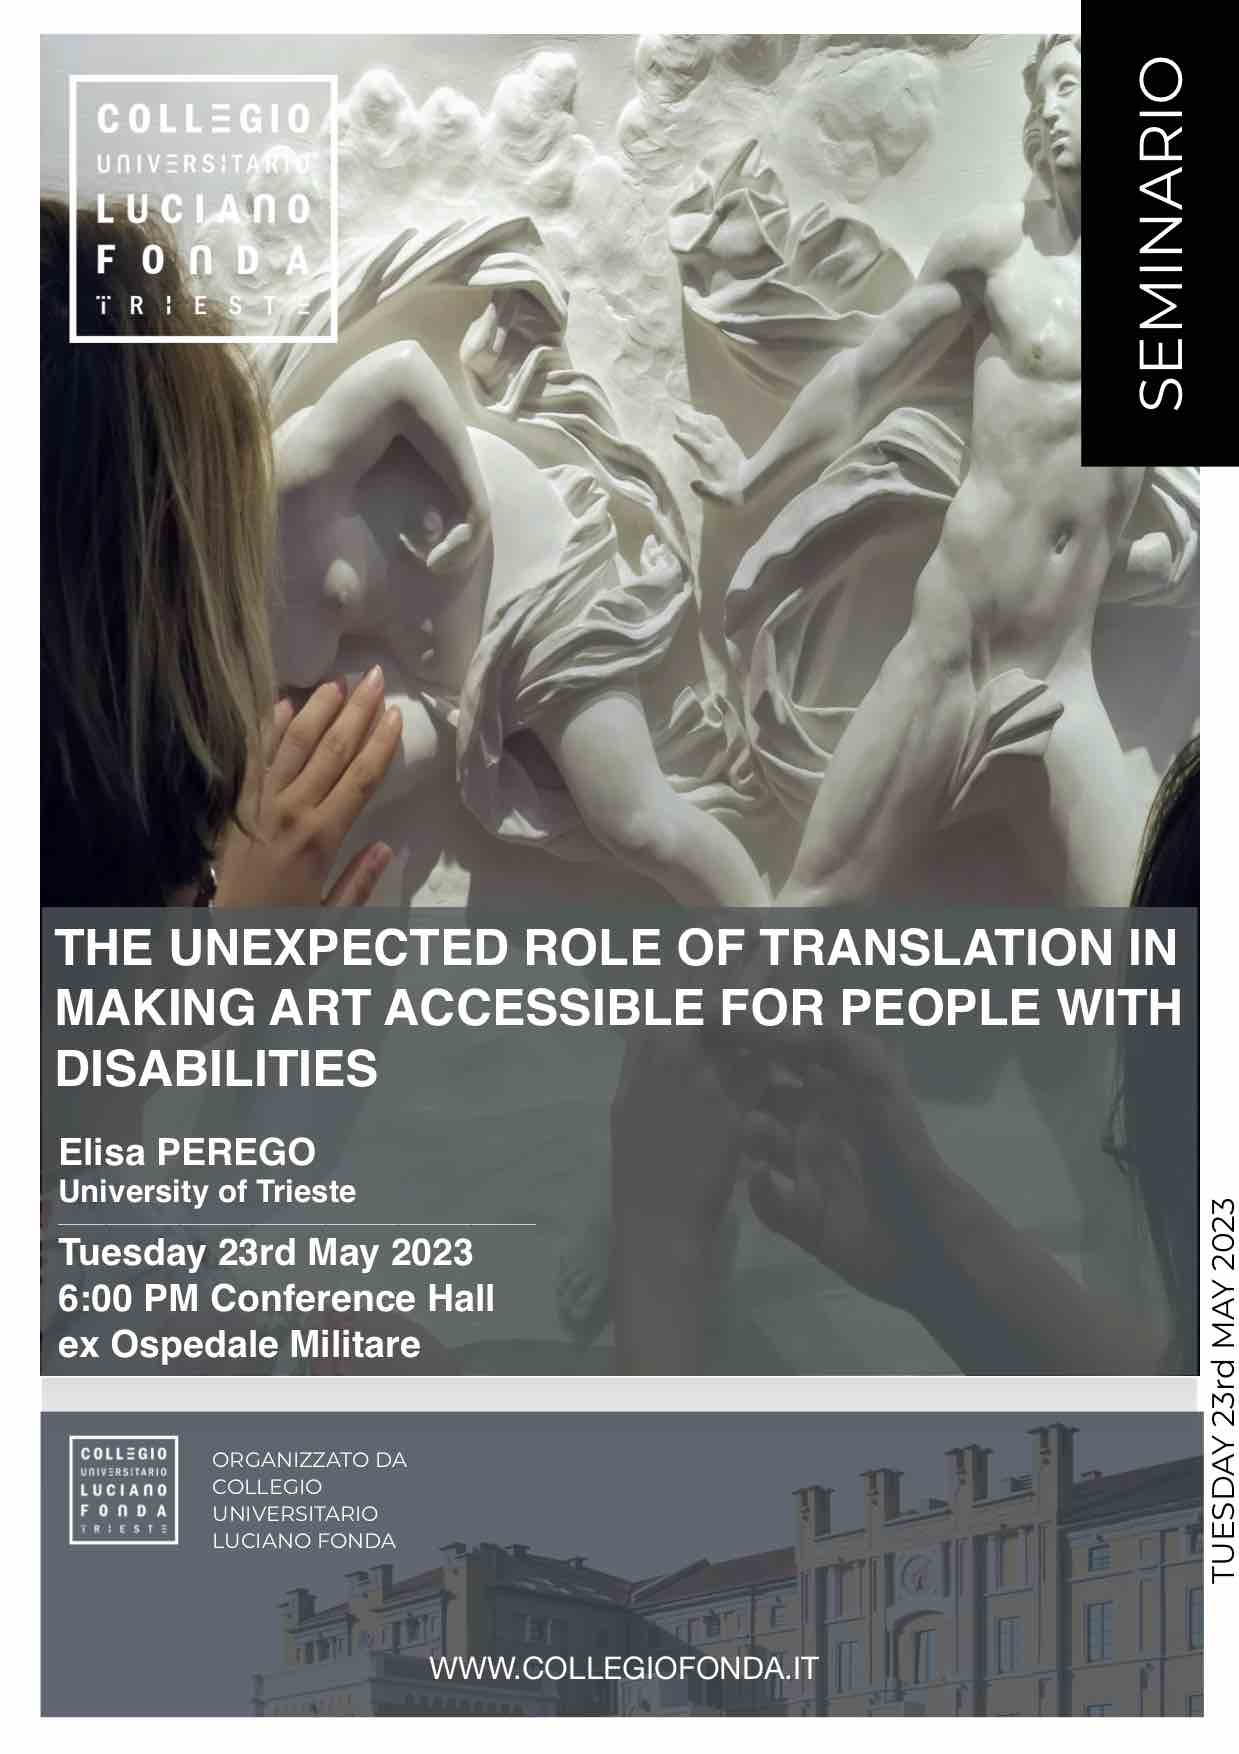 THE UNEXPECTED ROLE OF TRANSLATION IN MAKING ART ACCESSIBLE FOR PEOPLE WITH DISABILITIES – Tuesday, 23rd of May 2023 – Seminar by Elisa Perego